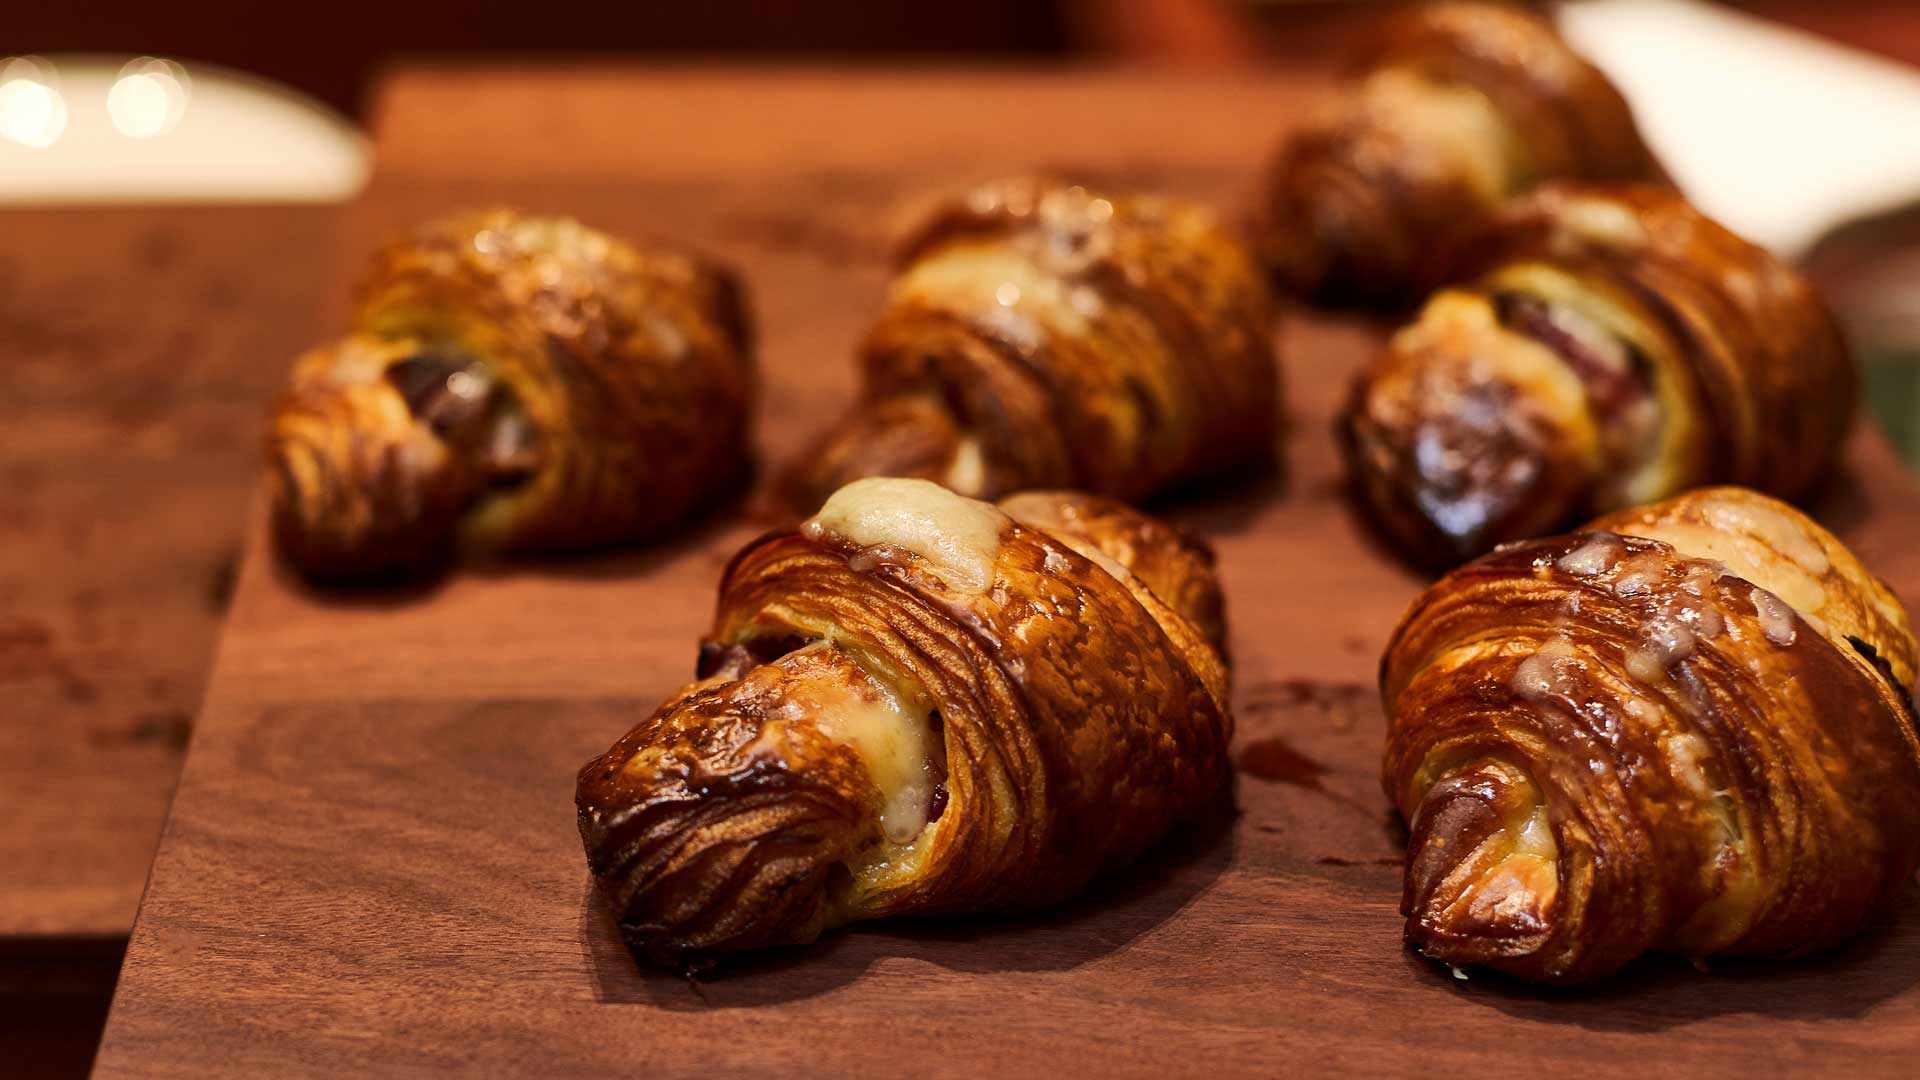 cheese croissants at Falco bakery - home to some of the best breakfast in Melbourne.